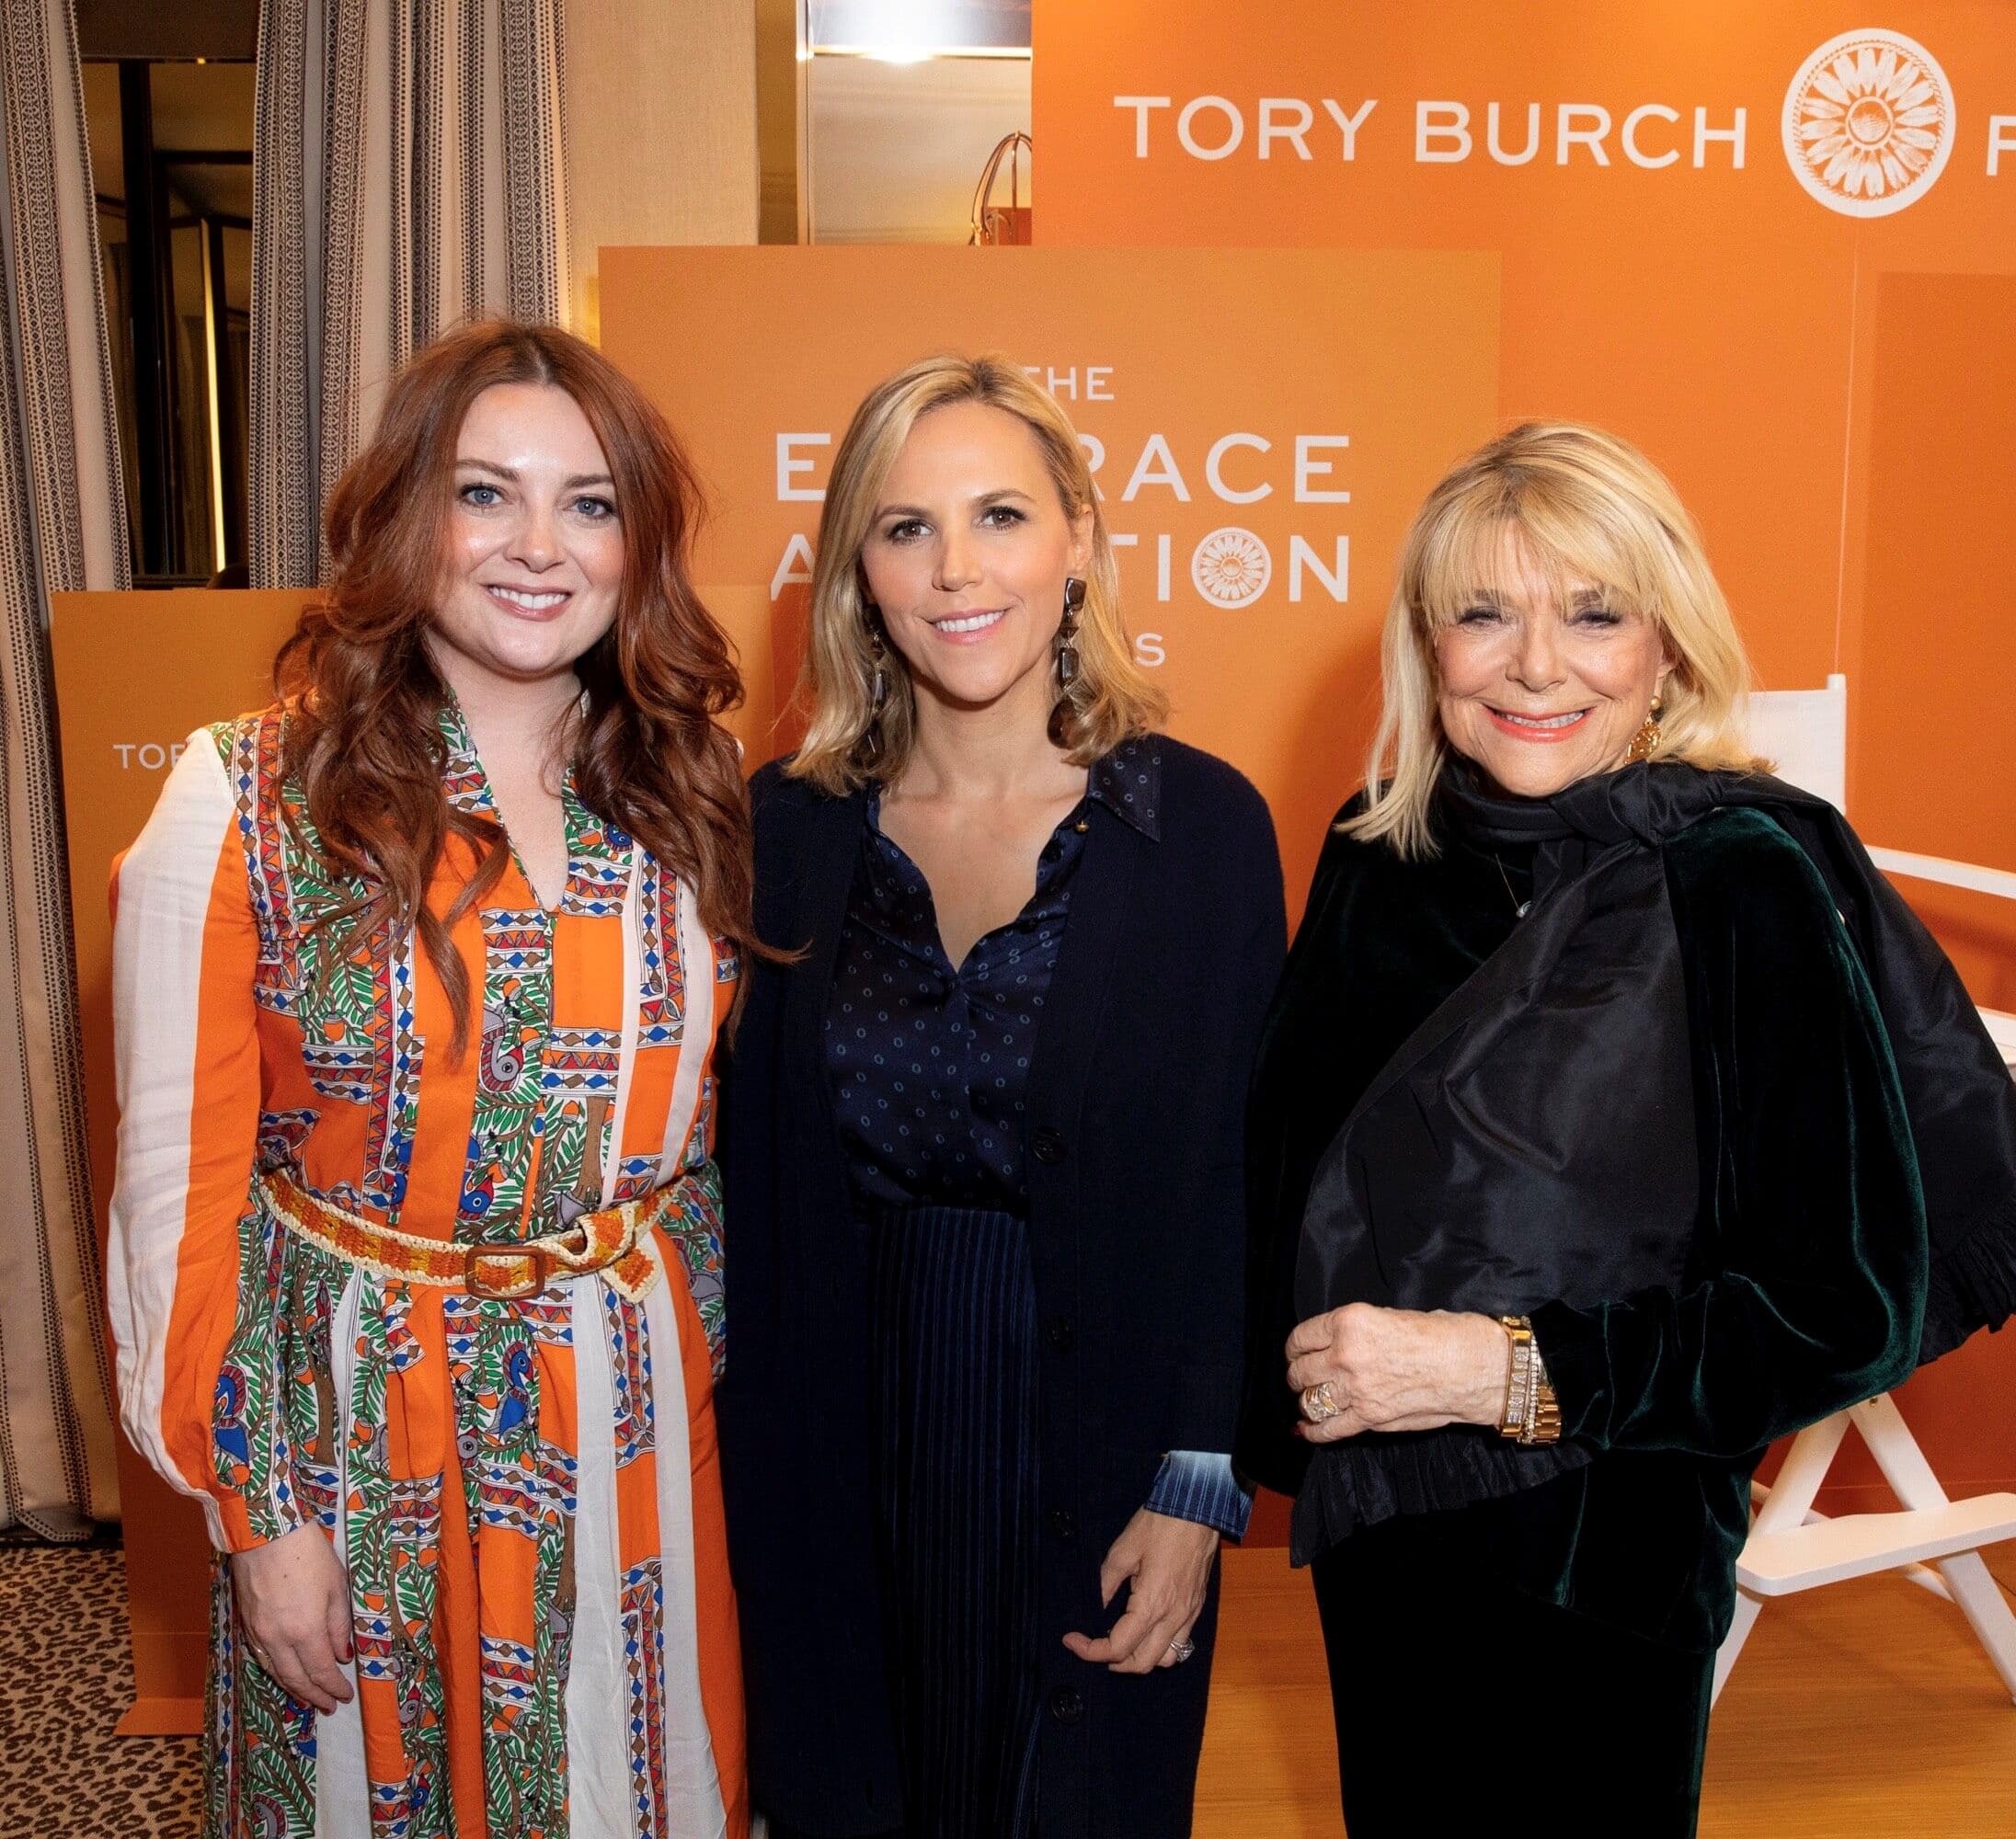 How Tory Burch aims to empower female entrepreneurs around the world